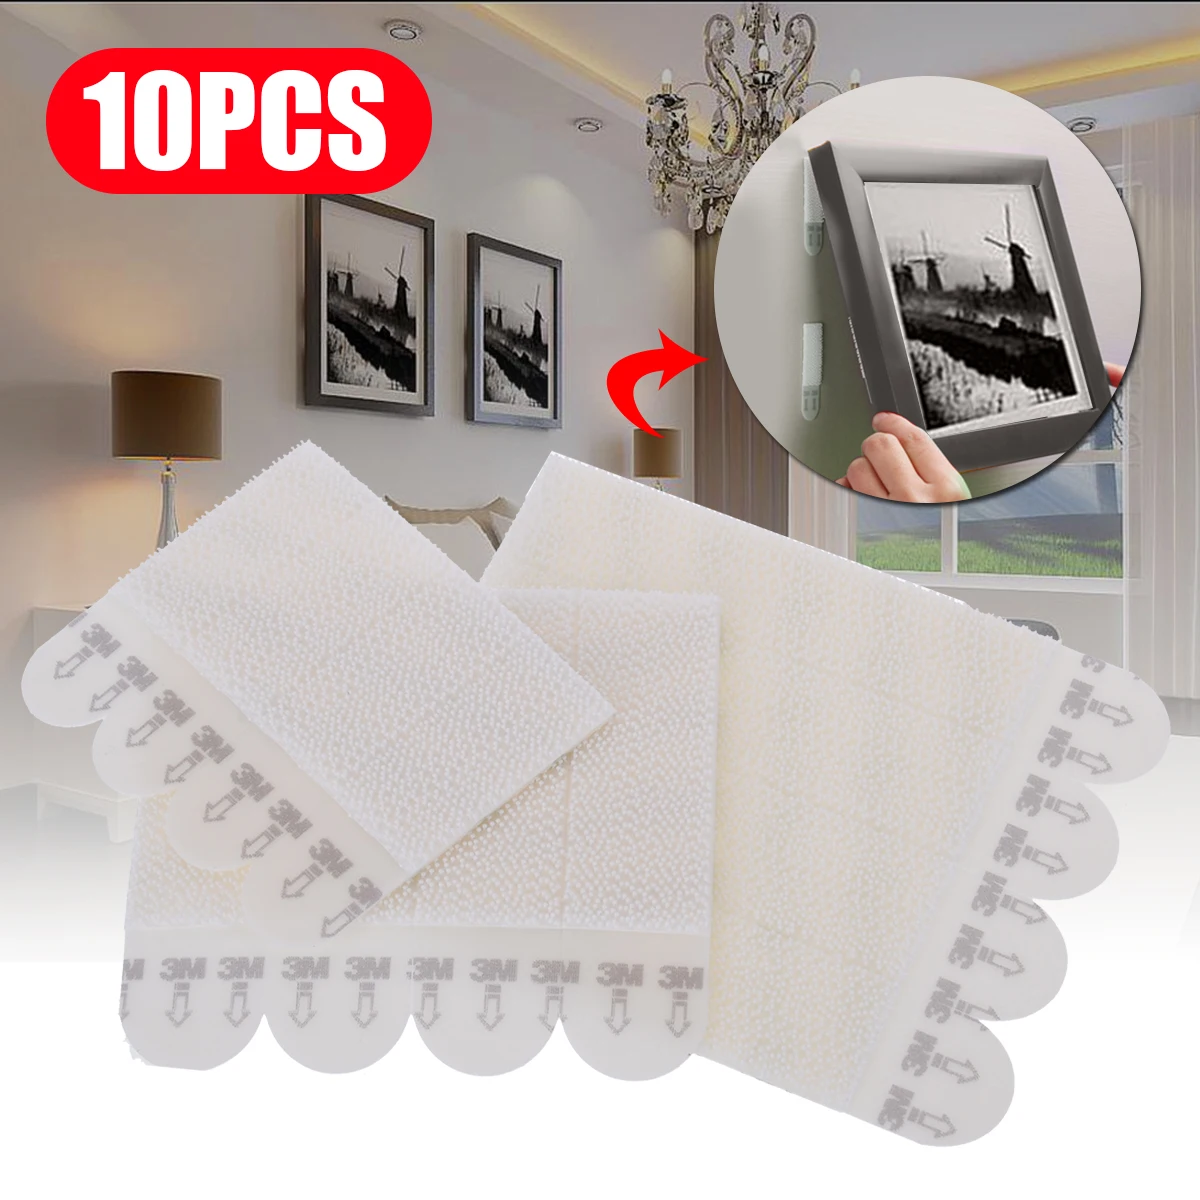 10pcs Command Damage-Free Hanging Strips Non-mark Command Hook Picture Poster Frame PVC Wall Sticker